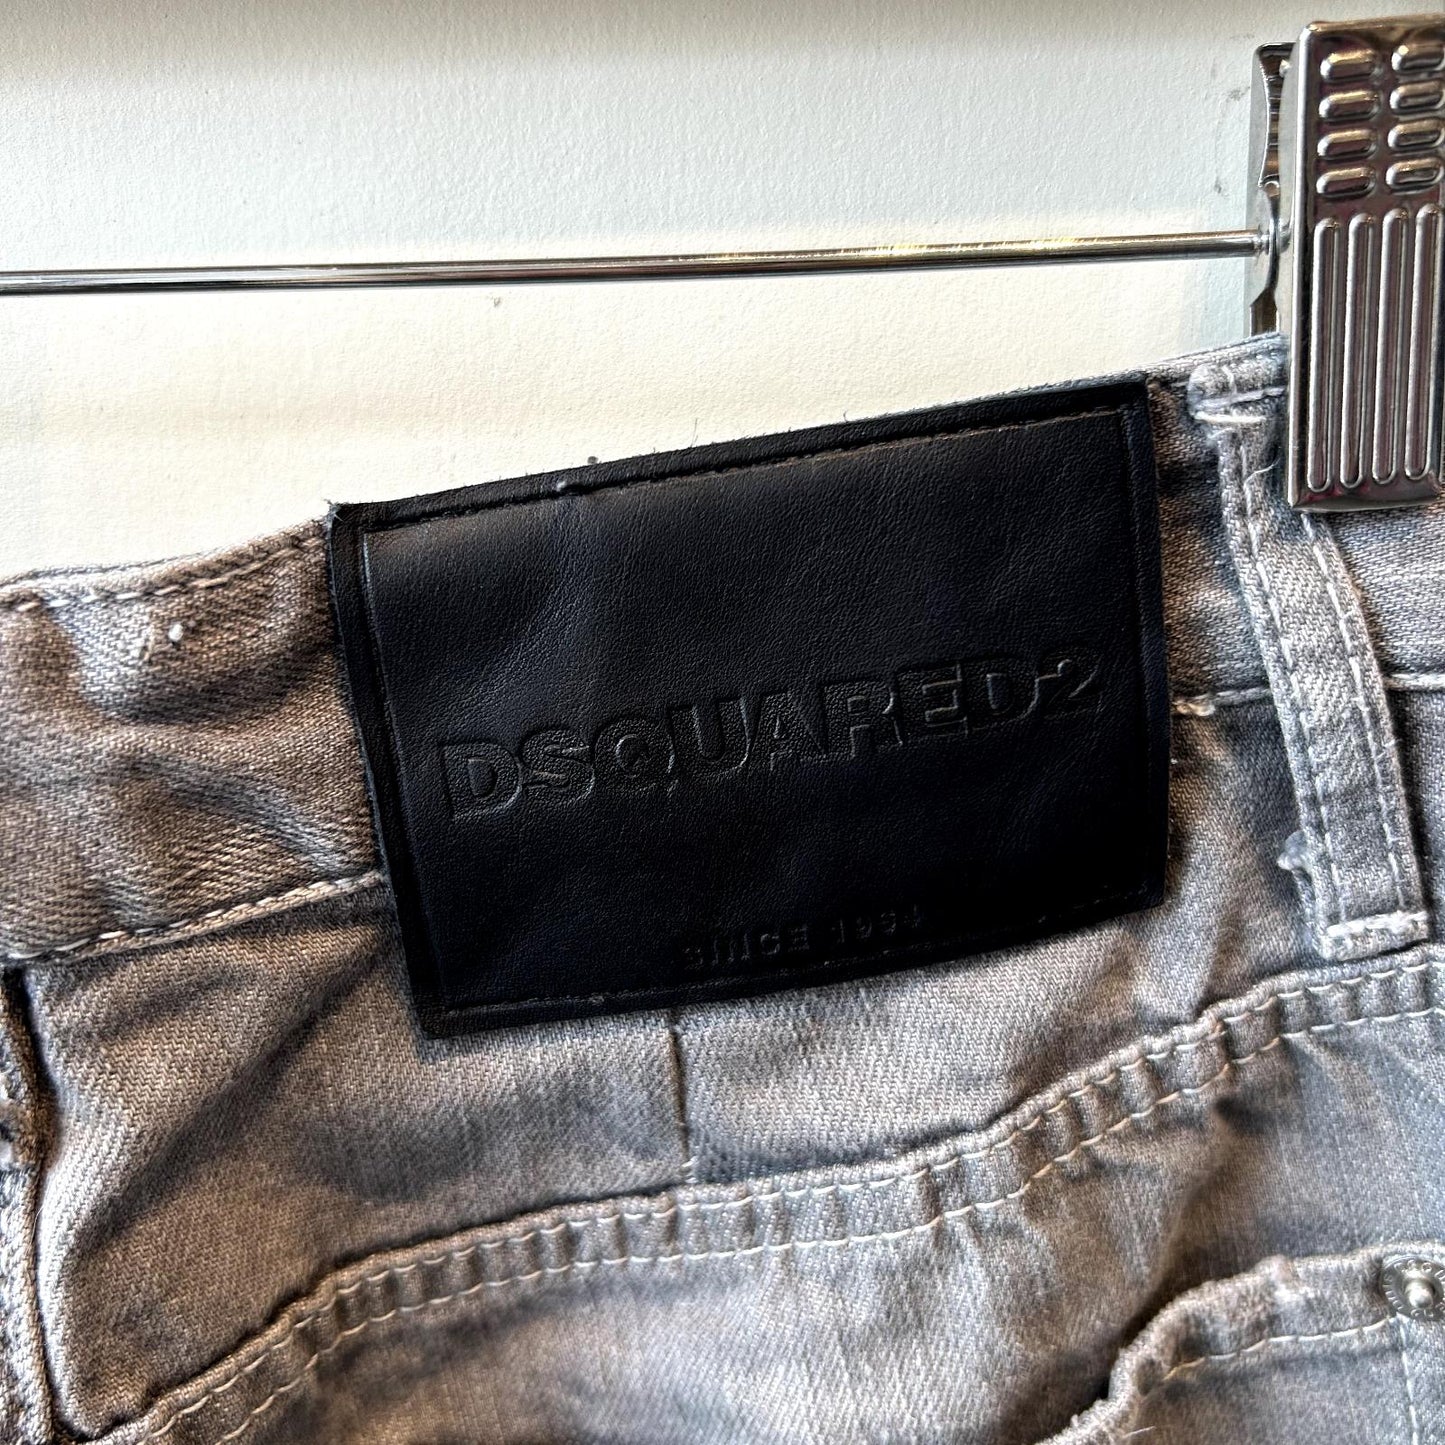 40 IT / S US - Dsquared2 Gray Cropped Distressed Button Fly Jeans 1202NB